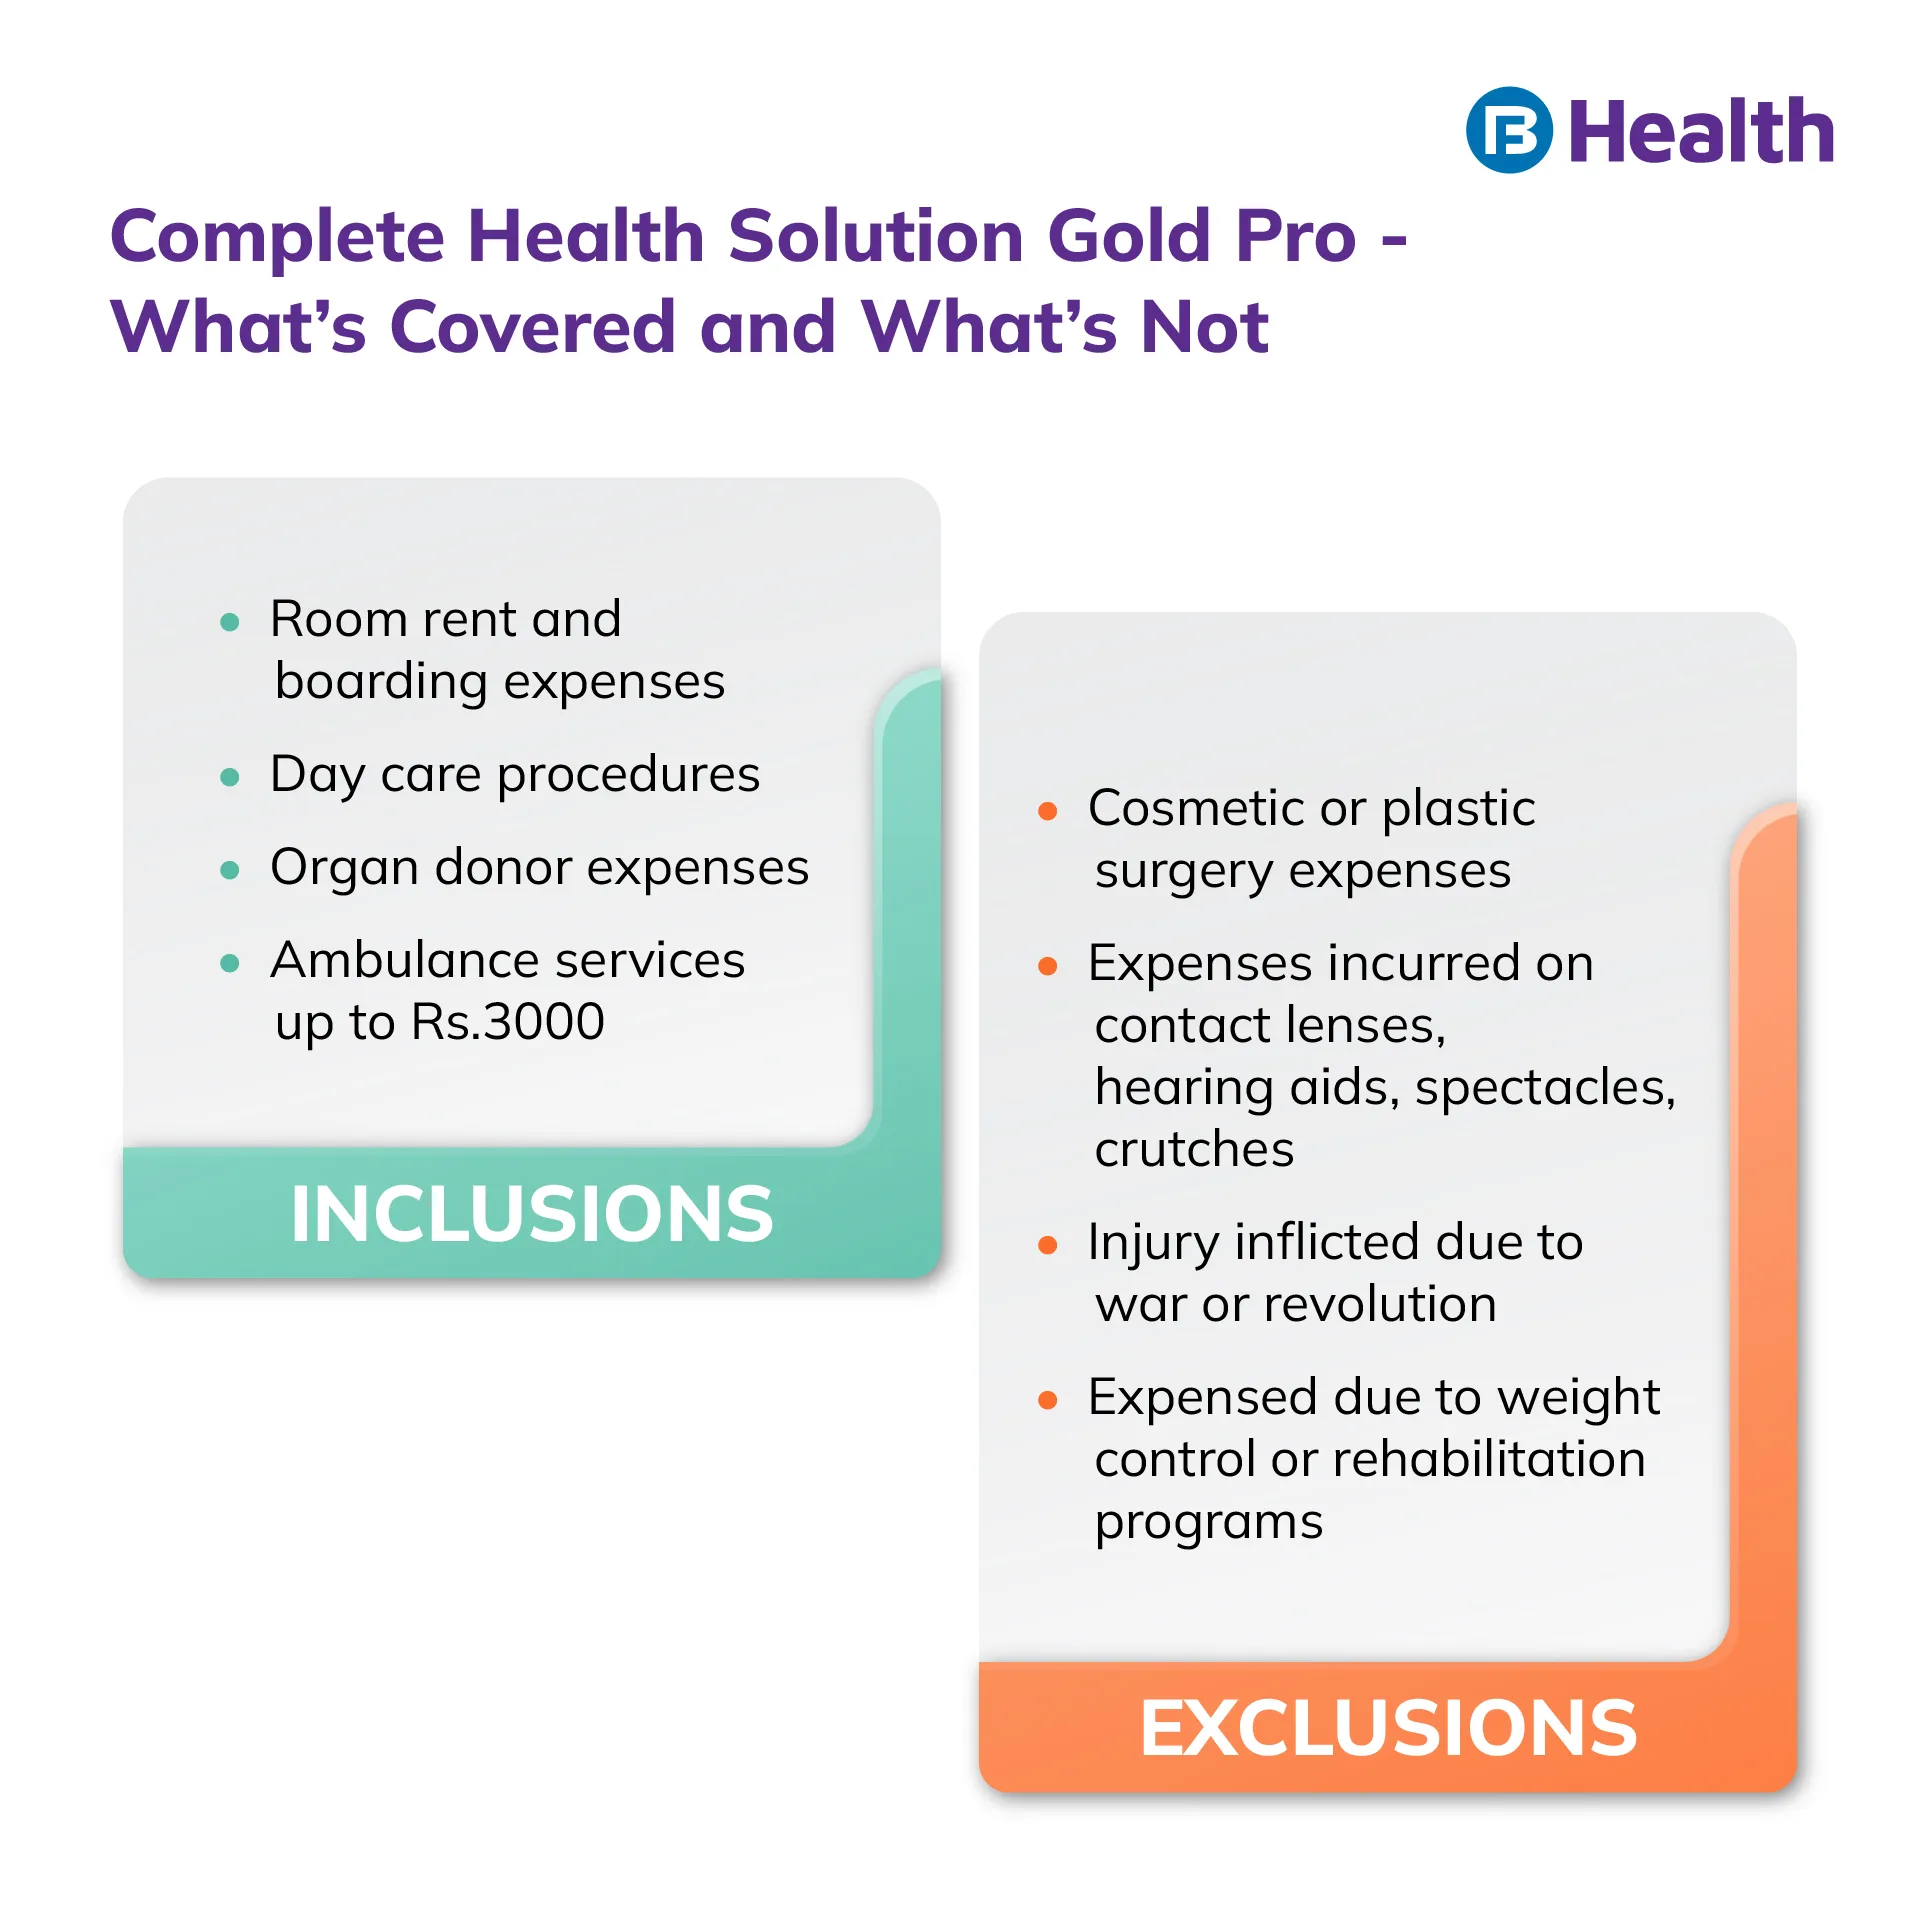 Complete Health Solution Gold Pro